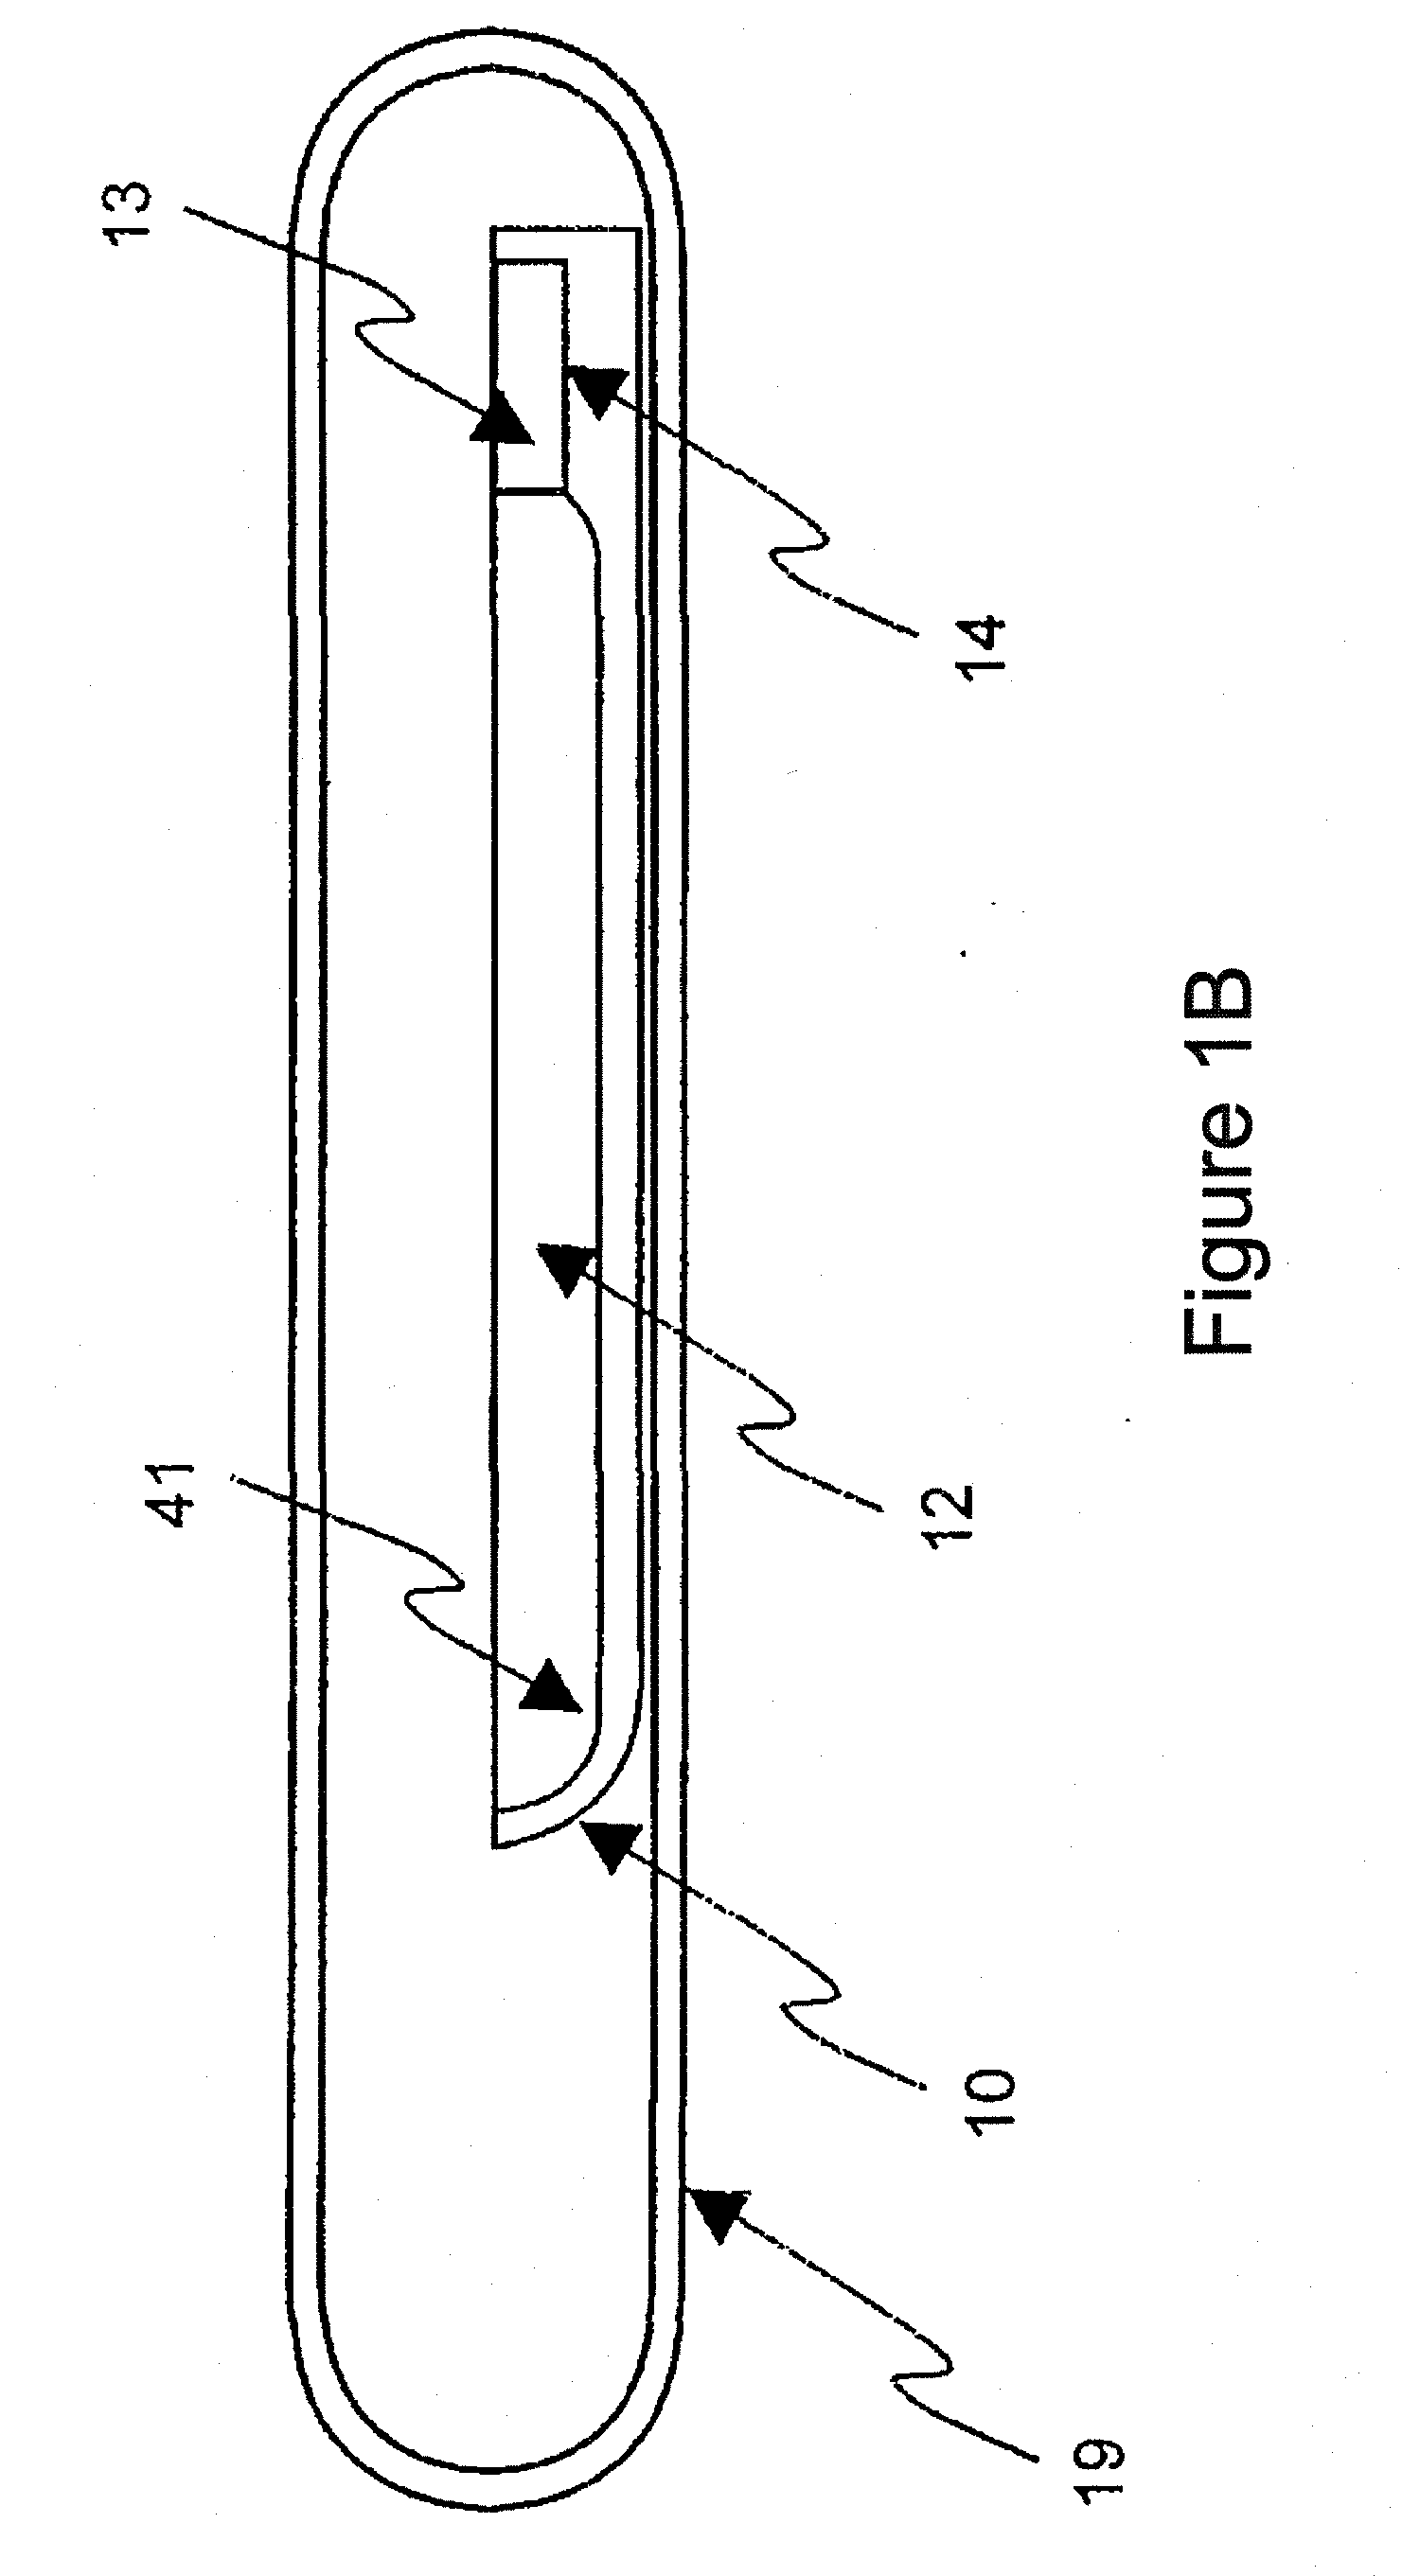 NONLINEAR OPTICAL CdSiP2 CRYSTAL AND PRODUCING METHOD AND DEVICES THEREFROM